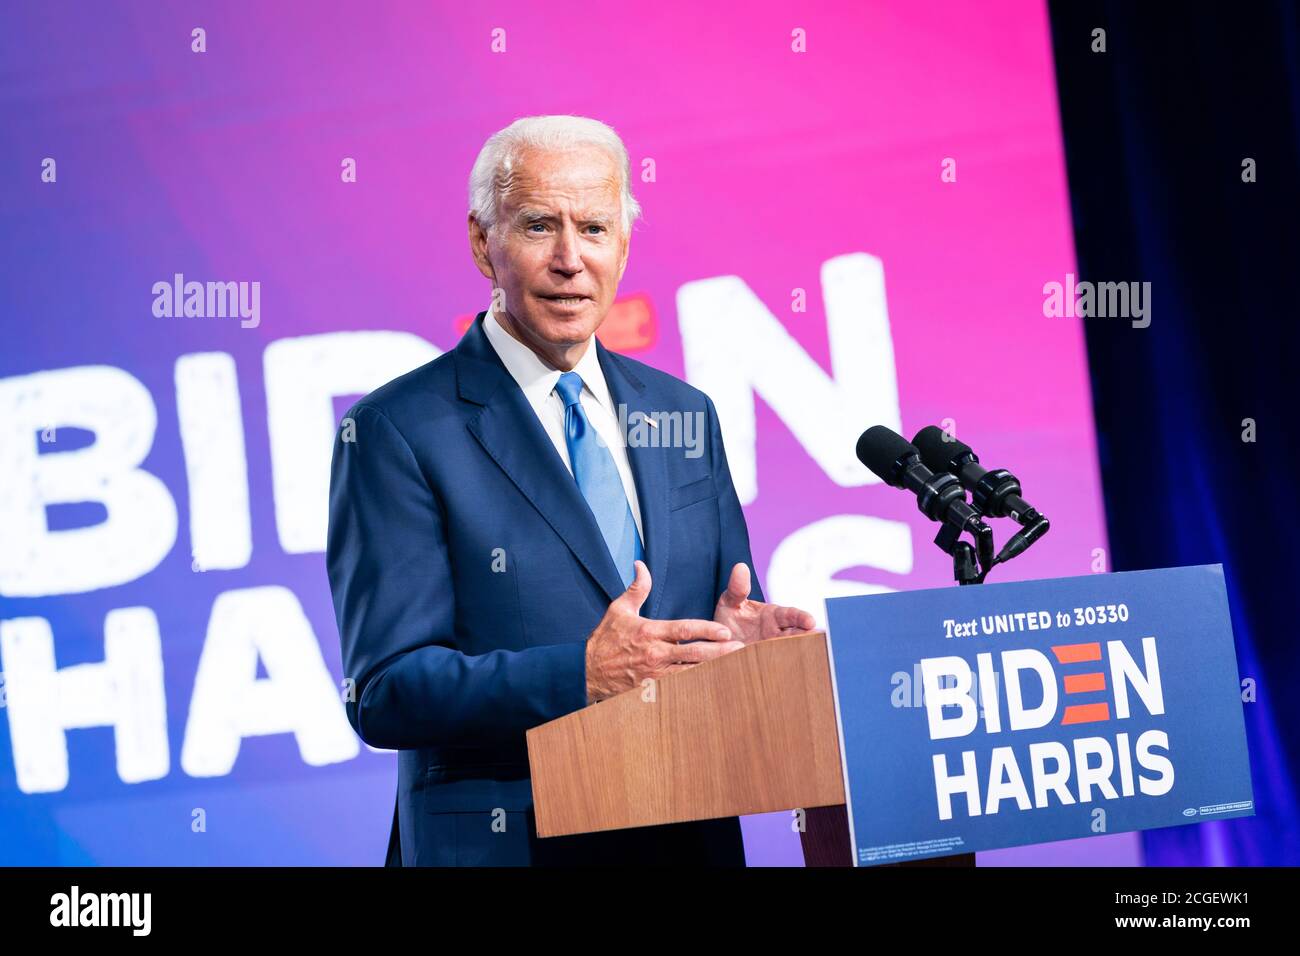 WILMINGTON, PA, USA - 02 September 2020 - Democratic US presidential candidate Joe Biden at a press conference on 'Regarding Safe School Reopening' in Stock Photo